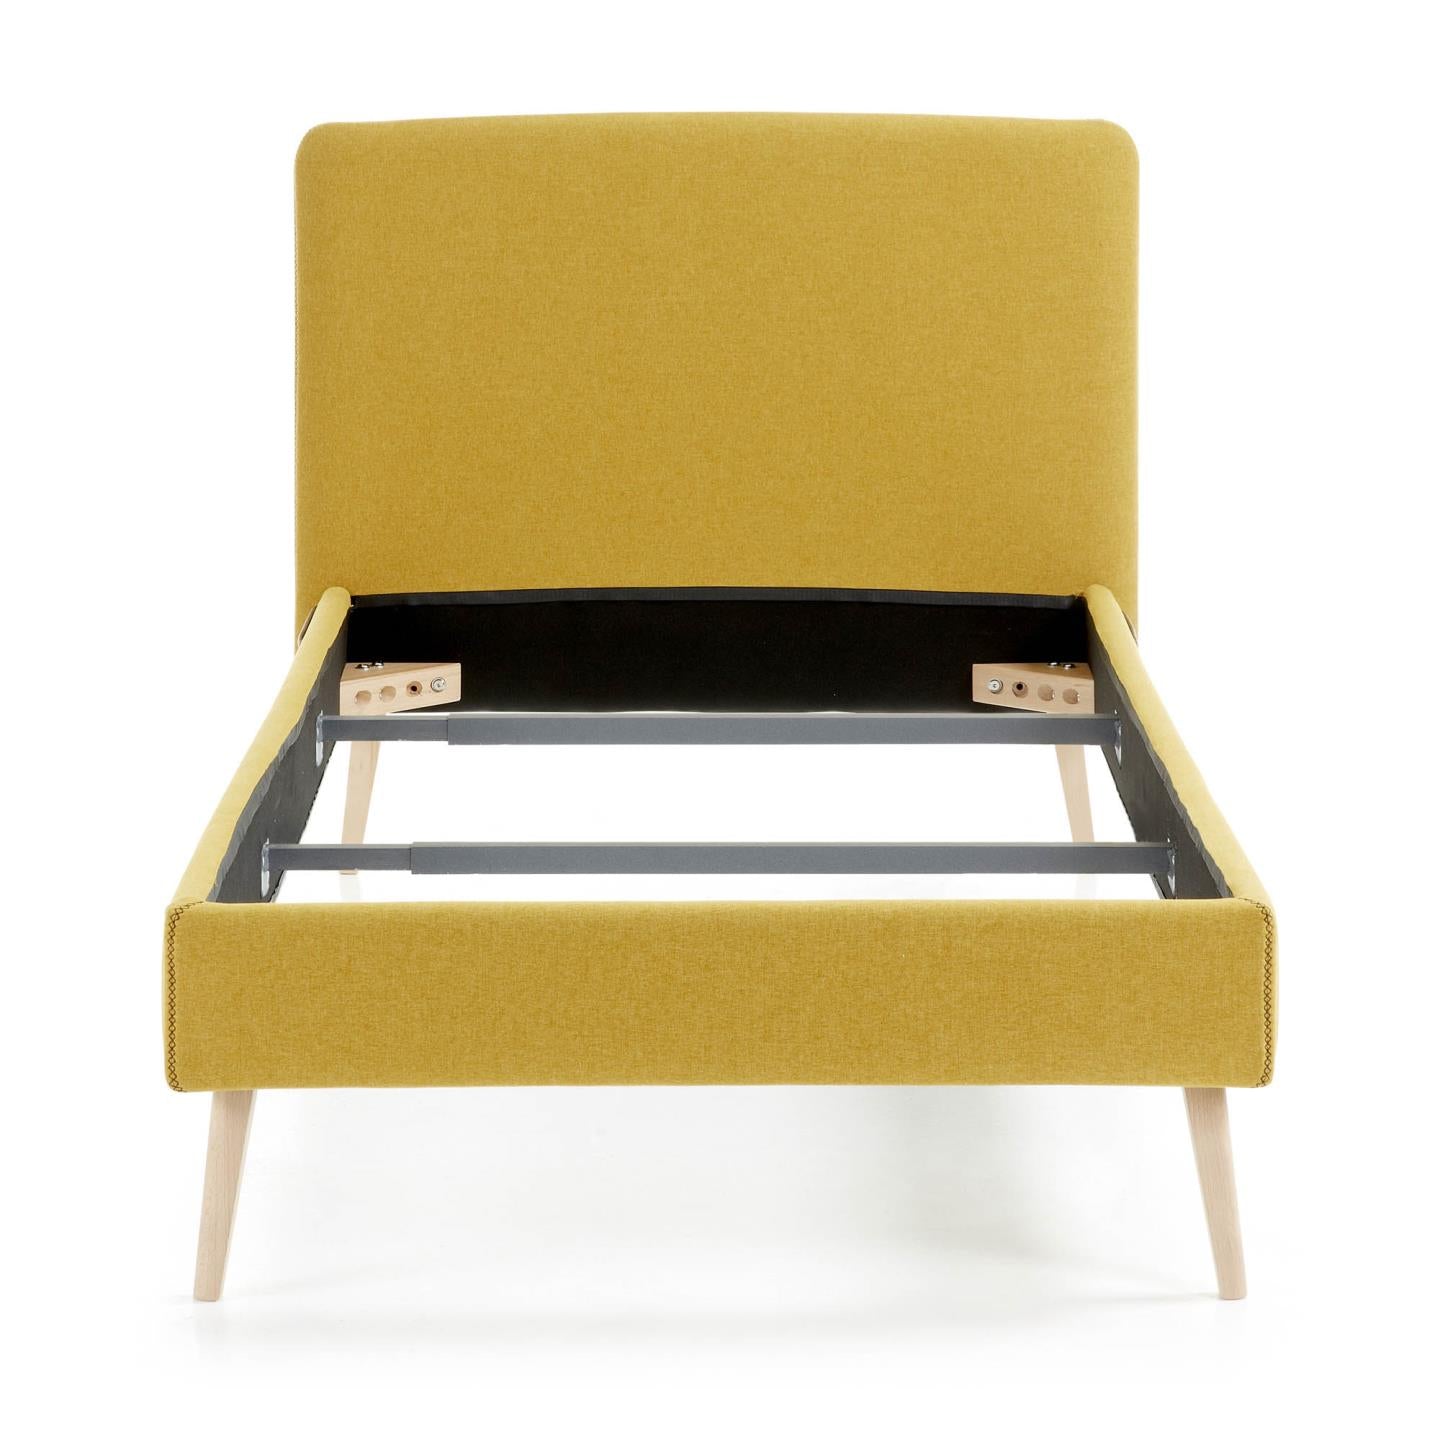 Dyla bed with removable cover in mustard, with solid beech wood legs for a 90 x 190 cm mattress